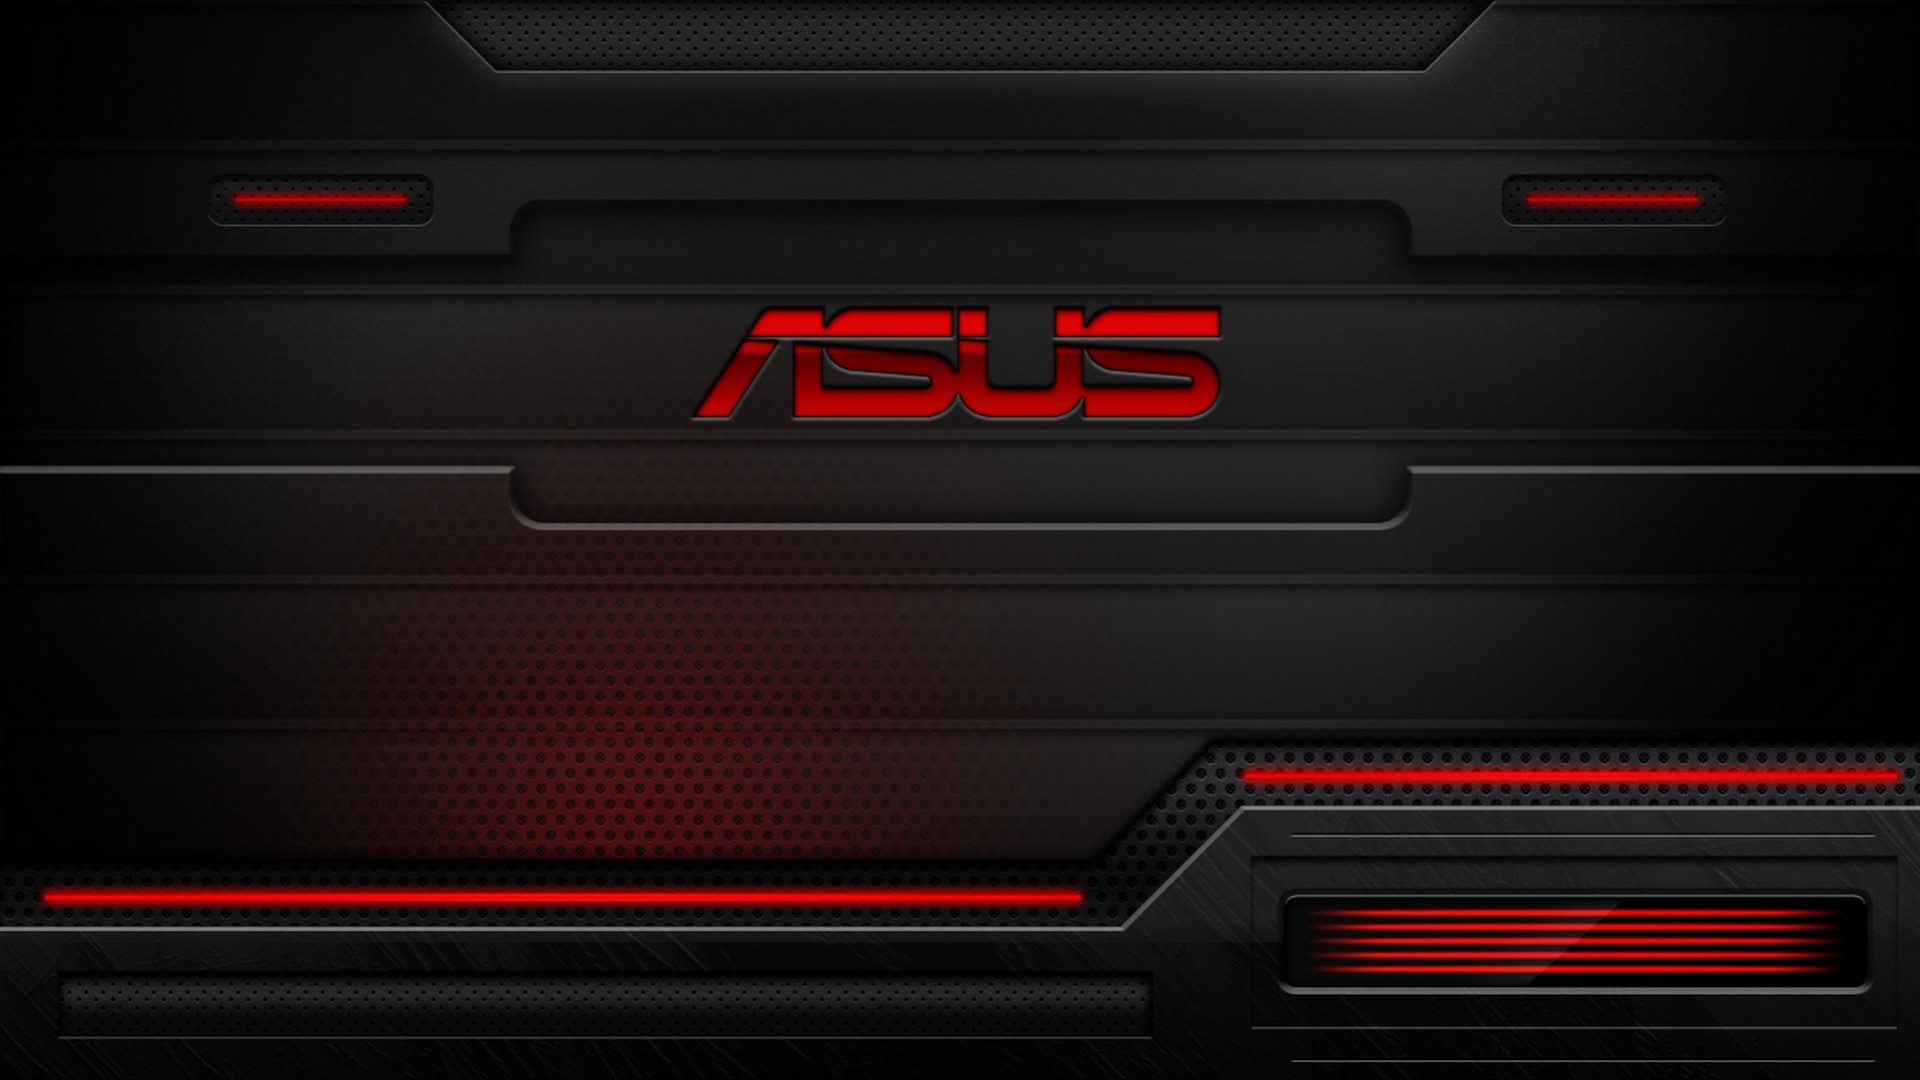 HD Red and Black Asus Technology Wallpaper for Desktop Full Size